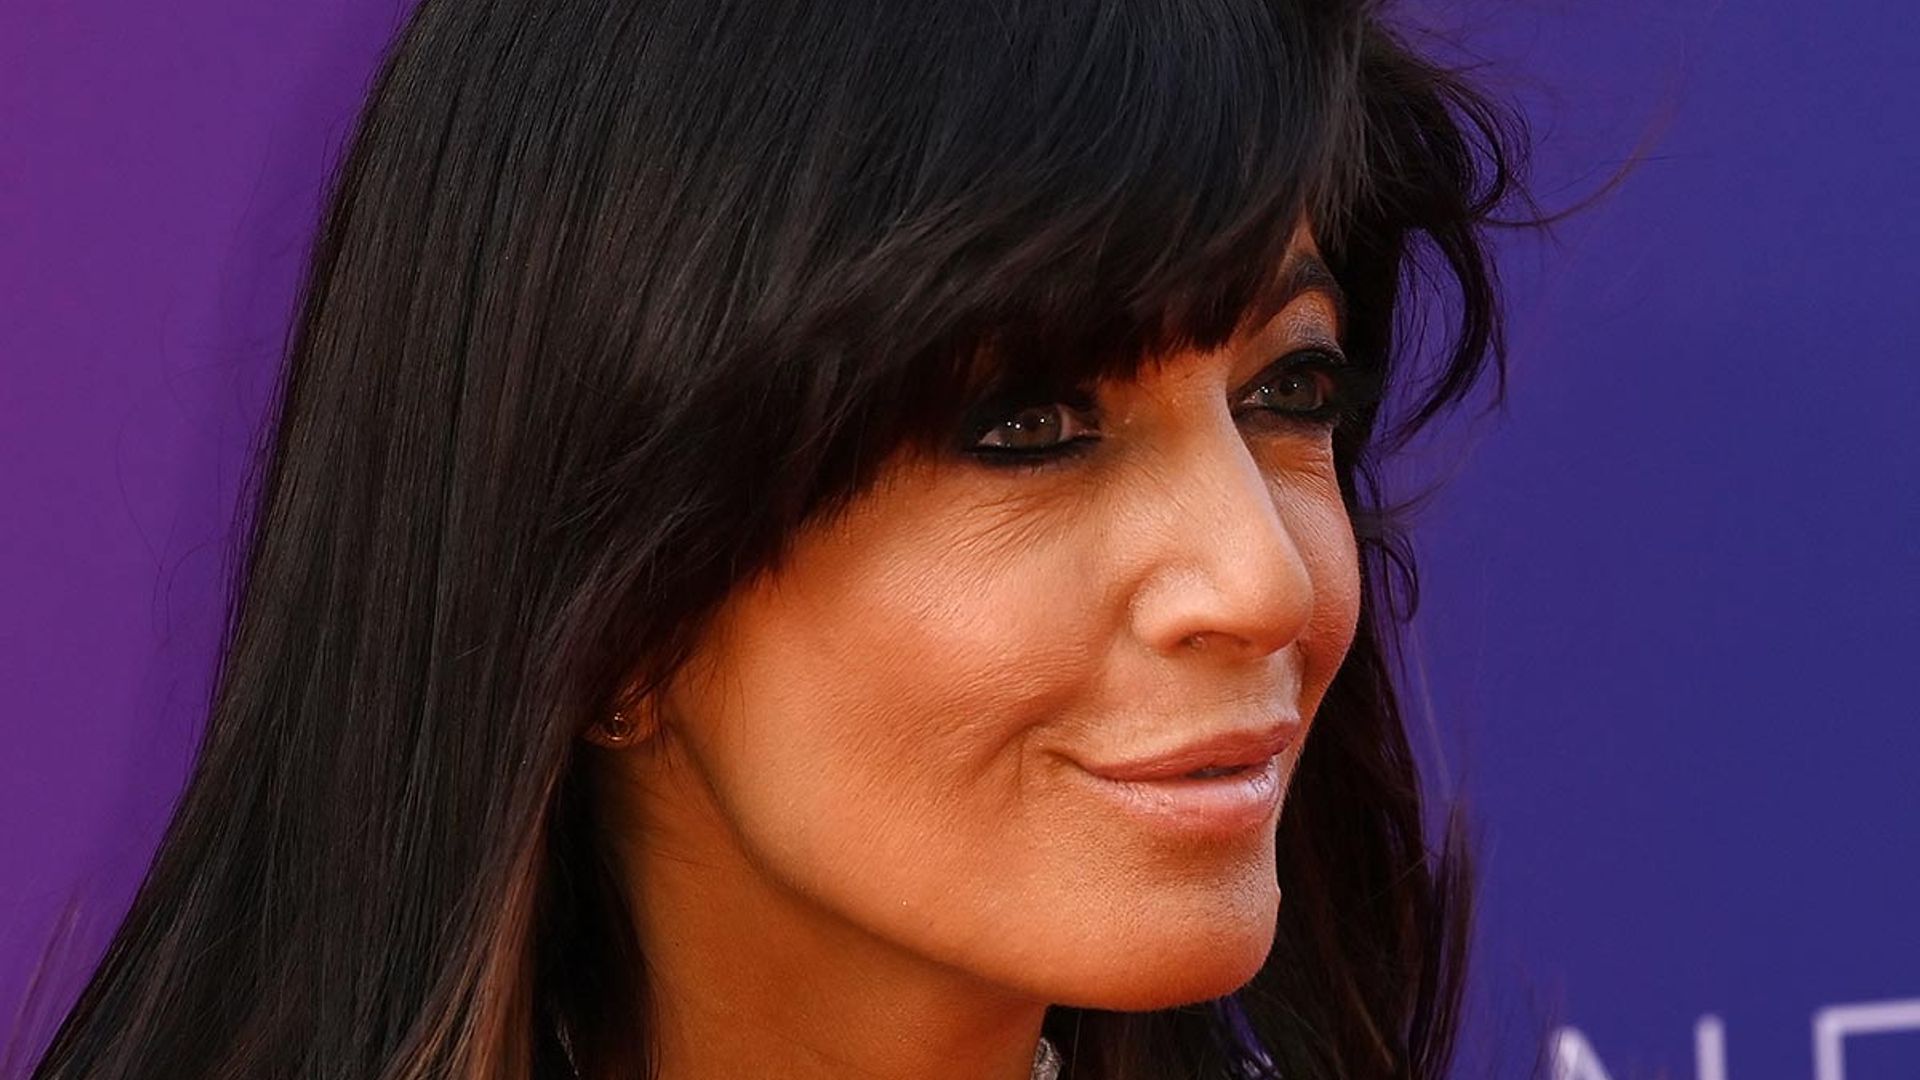 claudia winkleman strictly launch show outfit